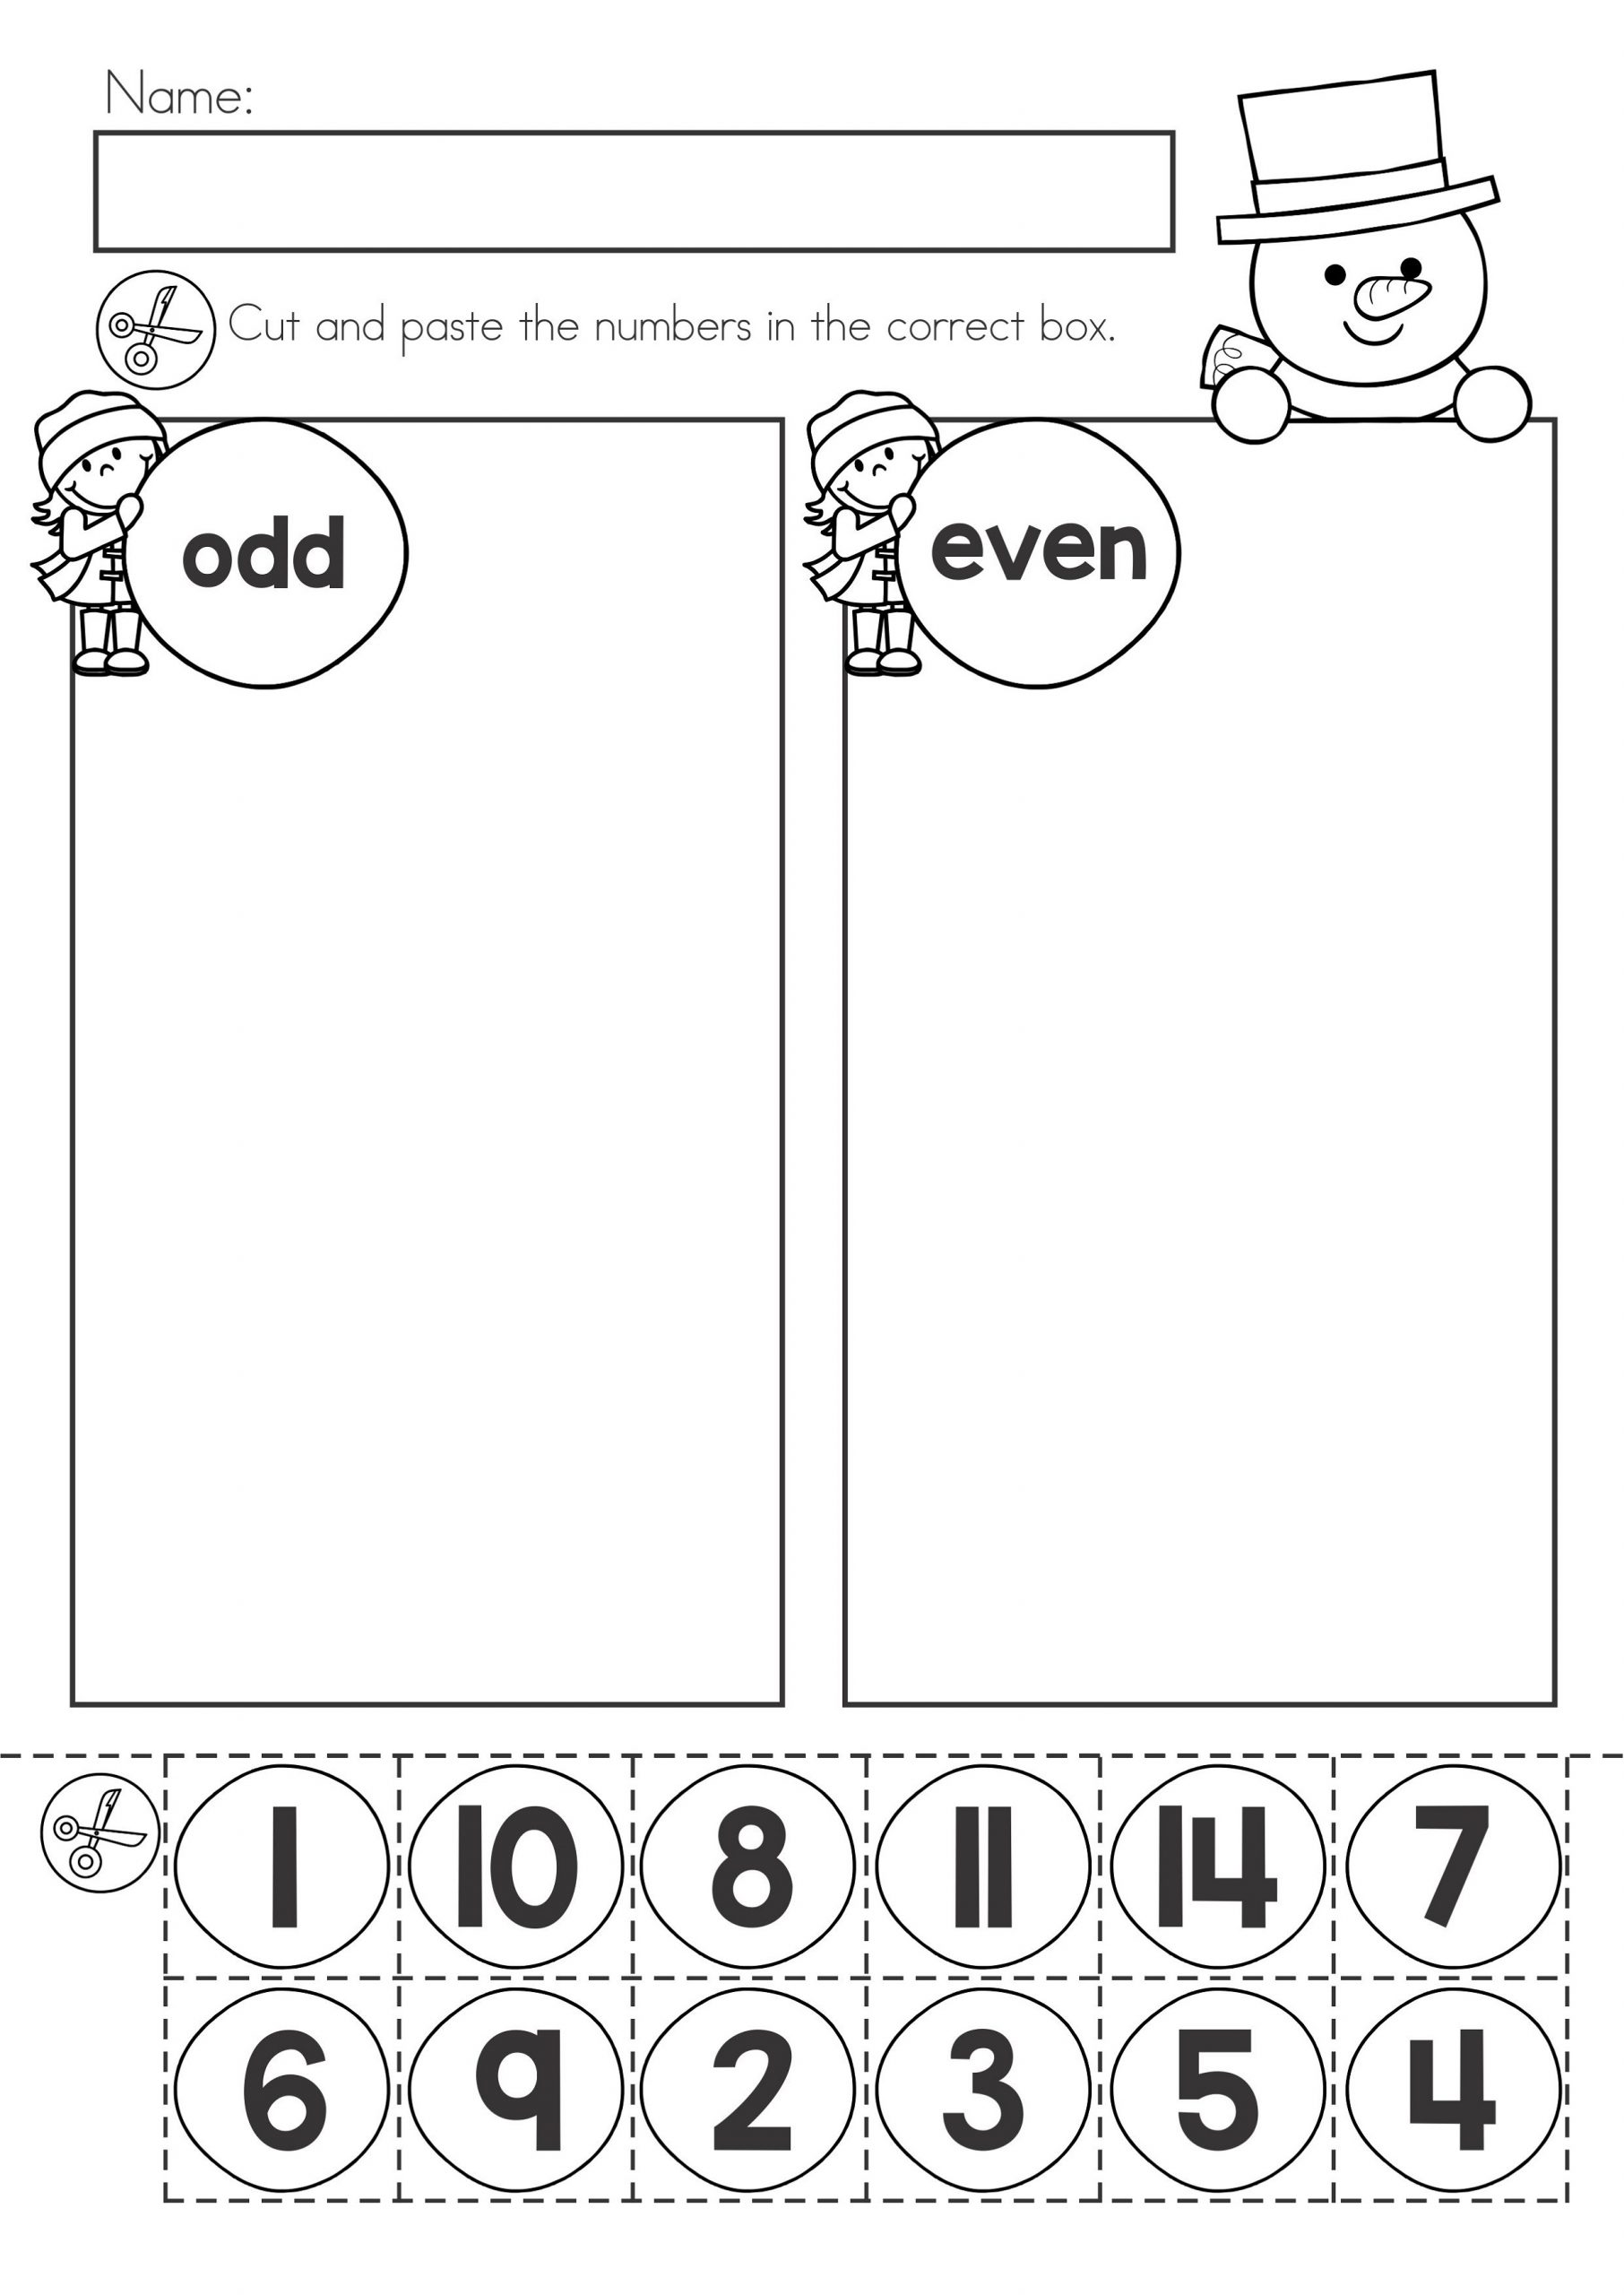 odd-and-even-numbers-chart-worksheet